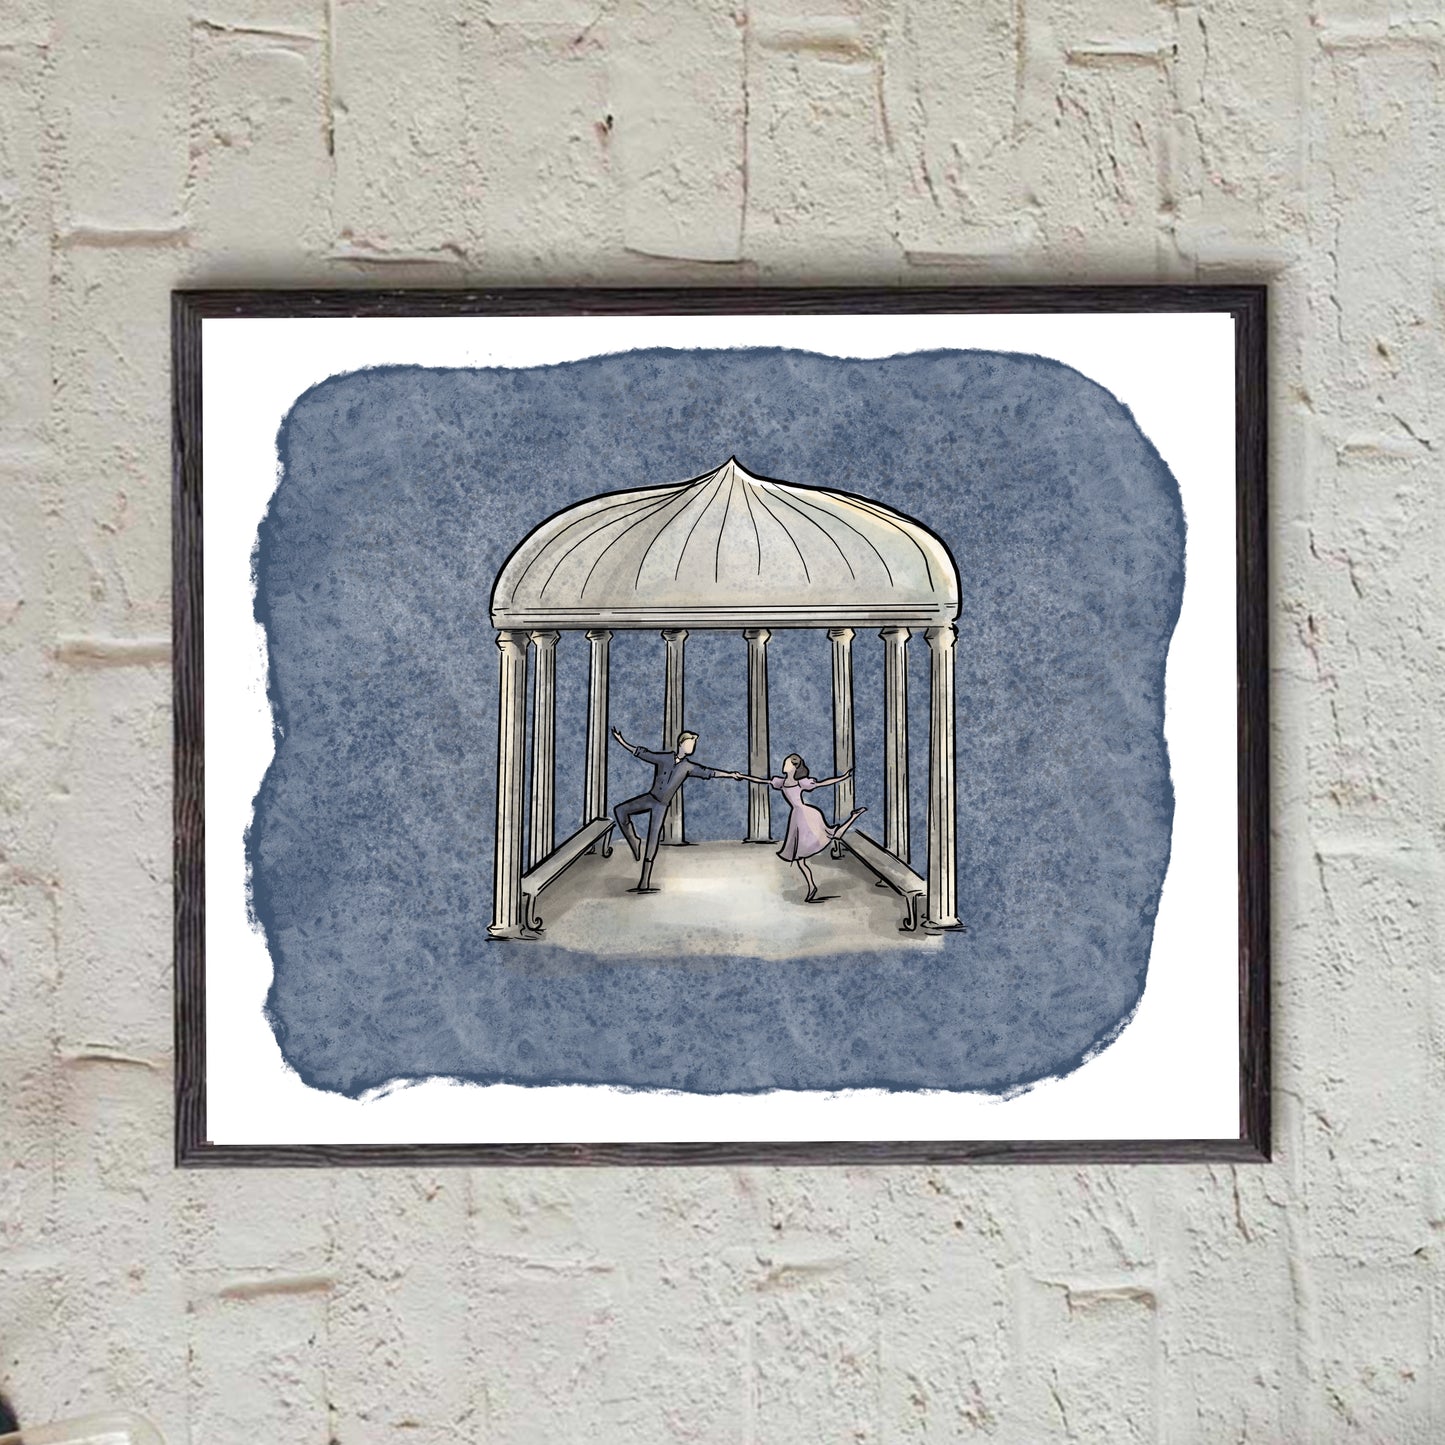 Dancing Under the Pavilion - Sound of Music Inspired print